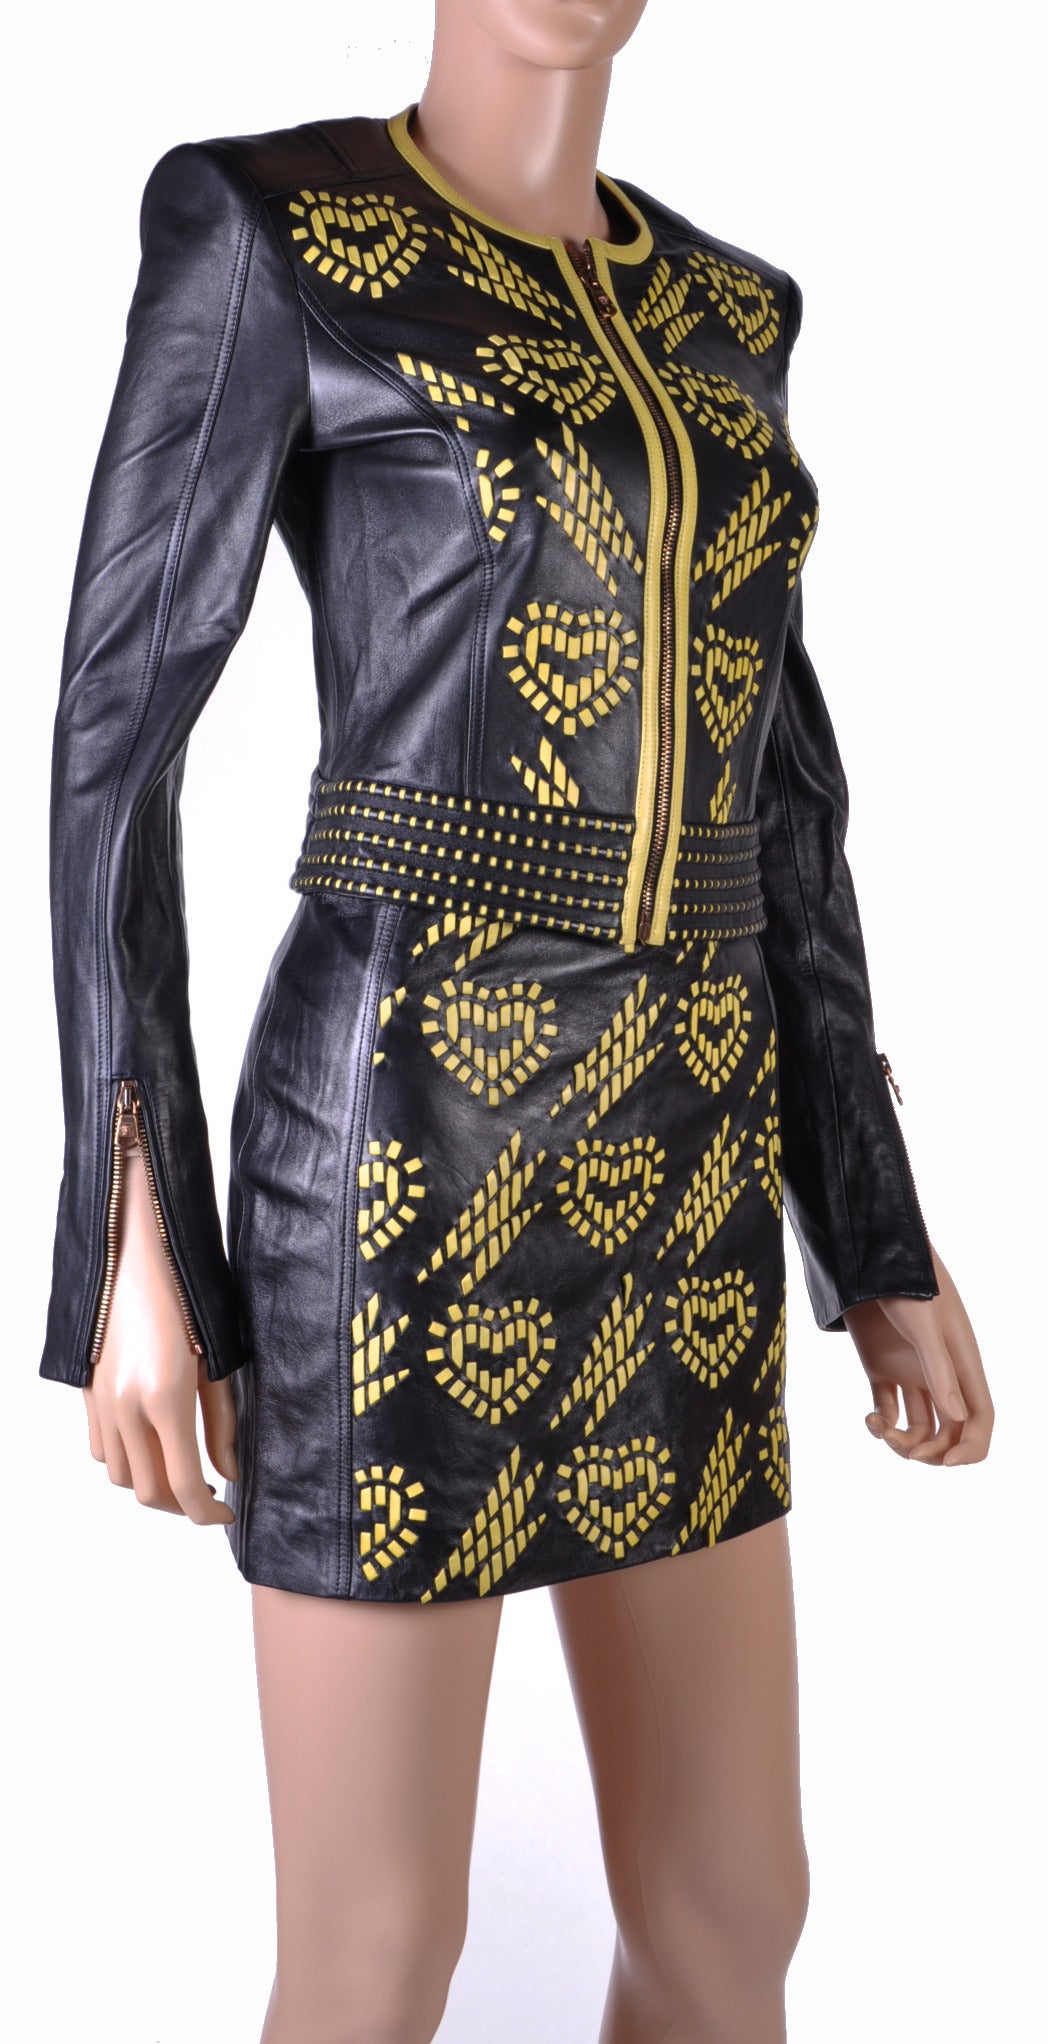 NEW VERSACE  SUIT

This fitted, black leather jacket is long sleeved 

and features round neck, laser cut applique and zip option at cuffs.

Front zip closure.

100% leather

Fully lined 

The skirt is 14